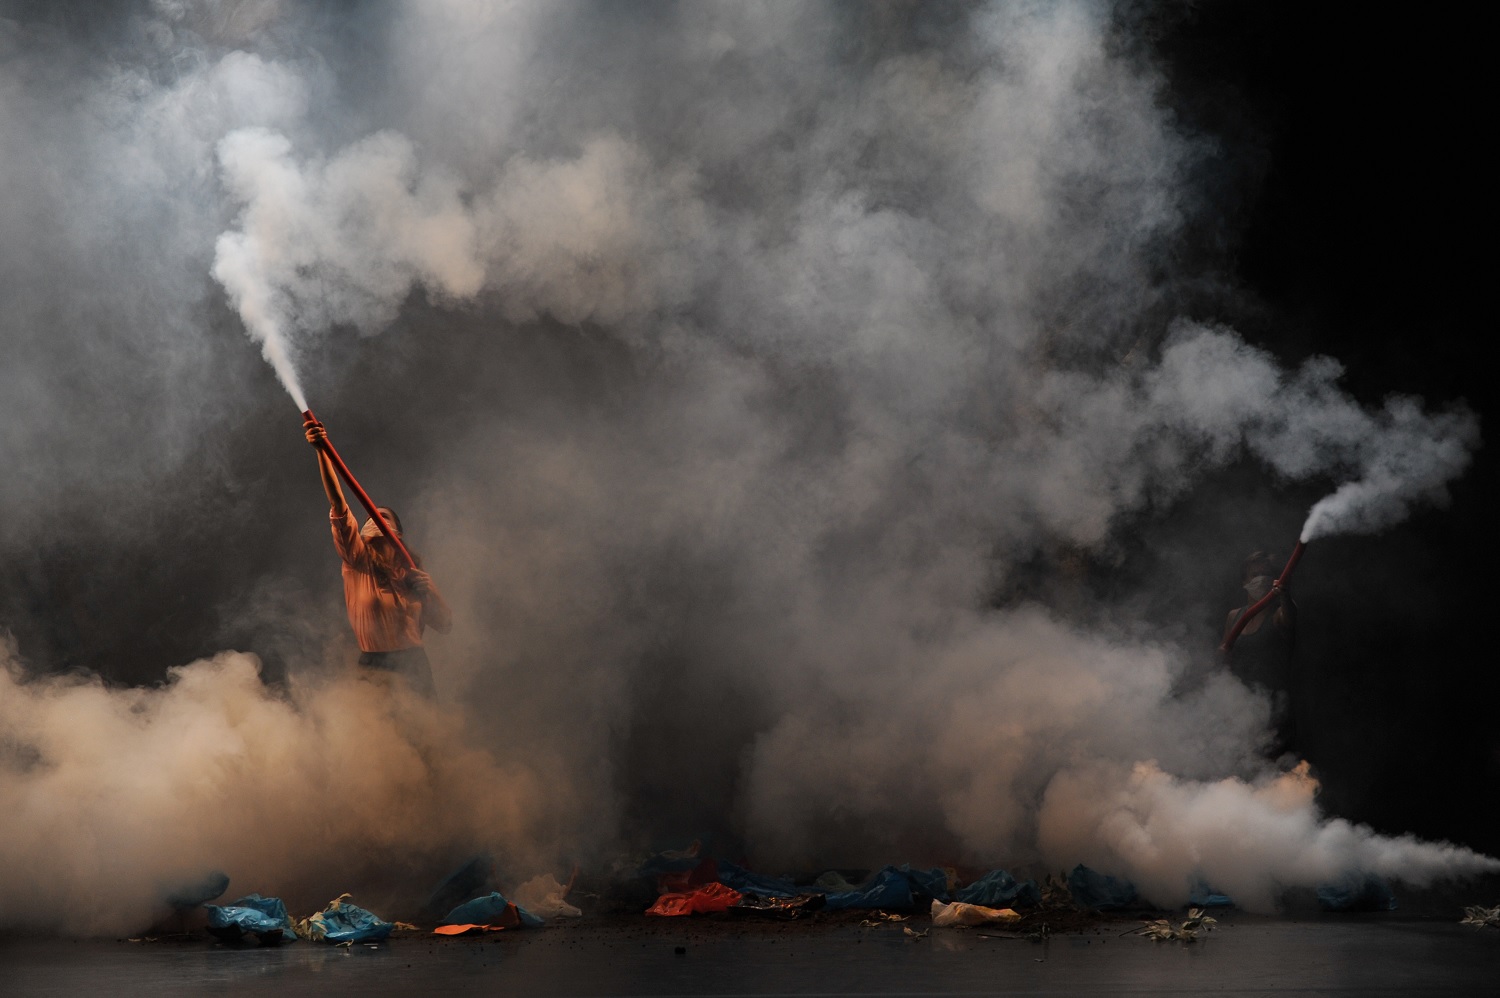 Two masked people on a black stage hold red tubes. Smoke is emerging from the tubes, so much that it is difficult to see. There appear to be small mounds of fabric on the ground all over the stage.